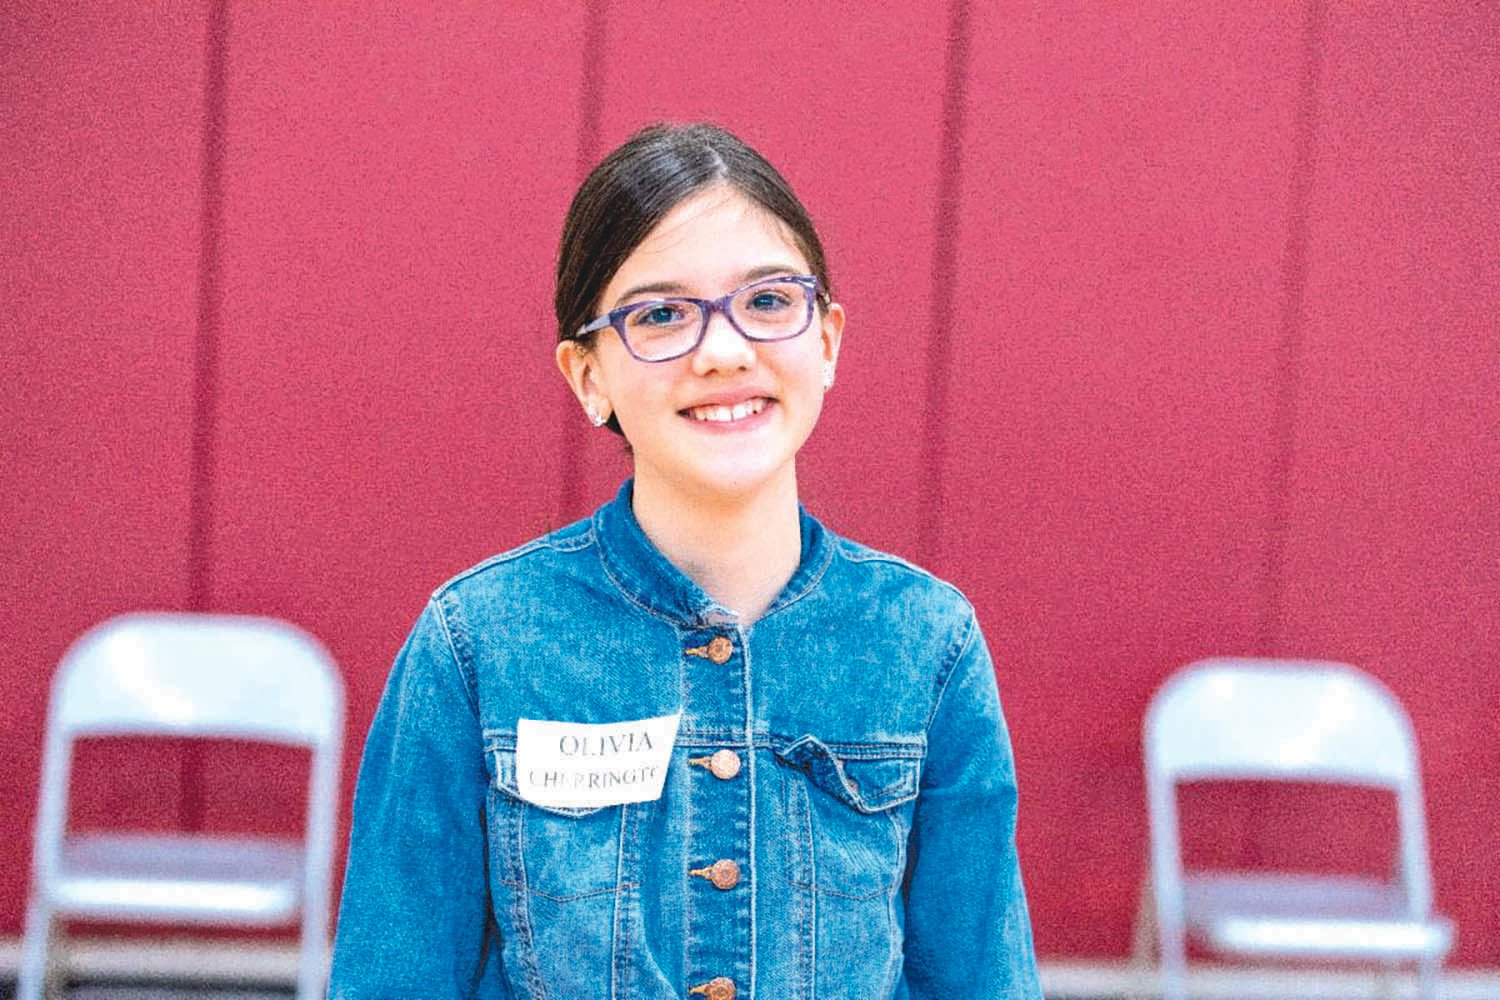 Fifth grade student Olivia Cherrington placed first in Orin Smith Elementary’s spelling bee on April 29.